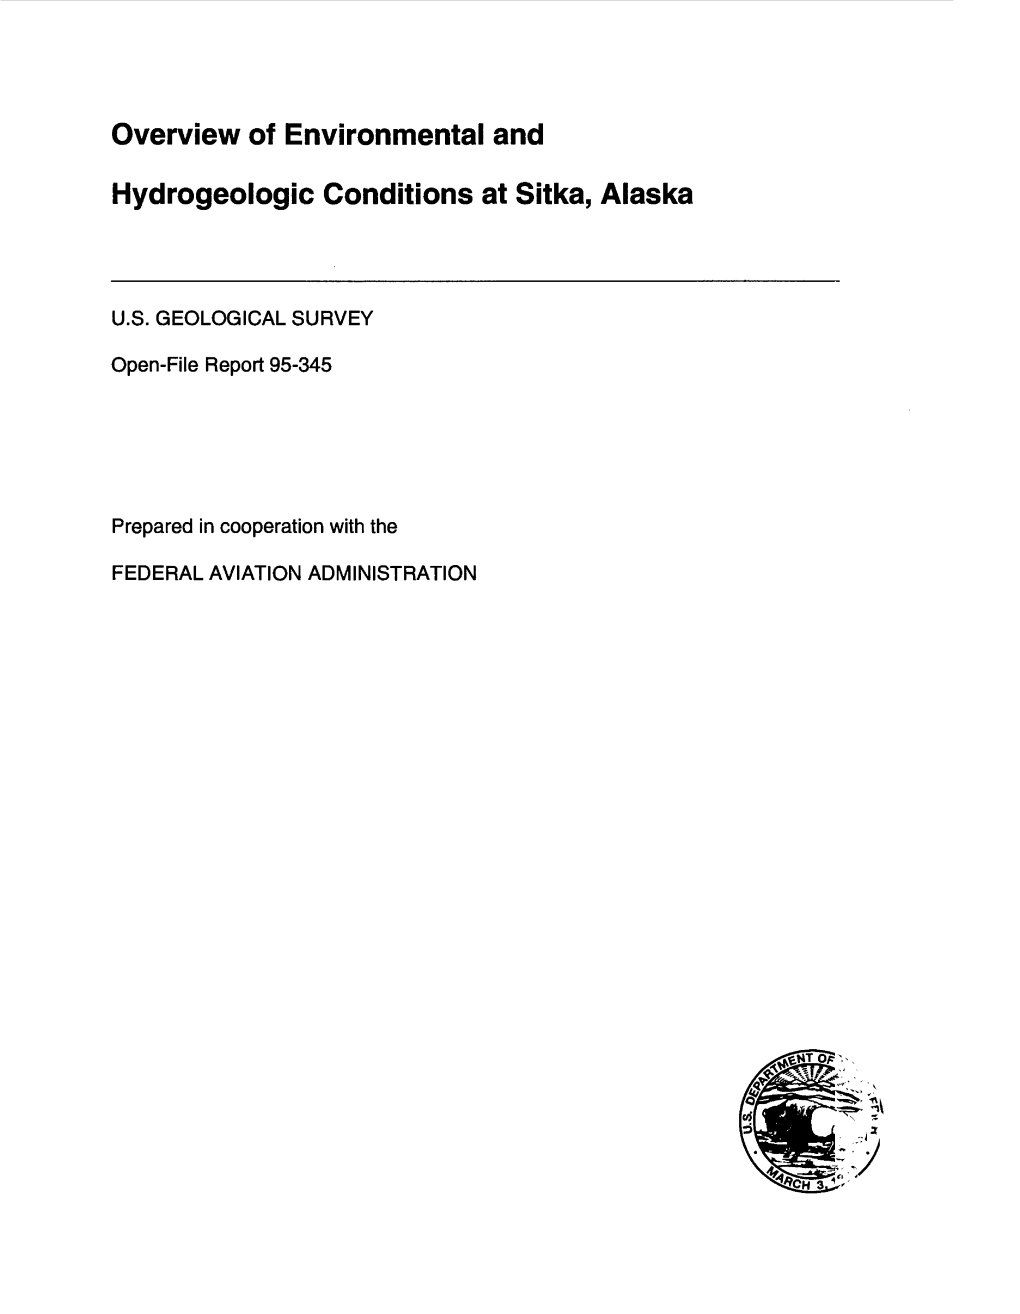 Overview of Environmental and Hydrogeologic Conditions at Sitka, Alaska